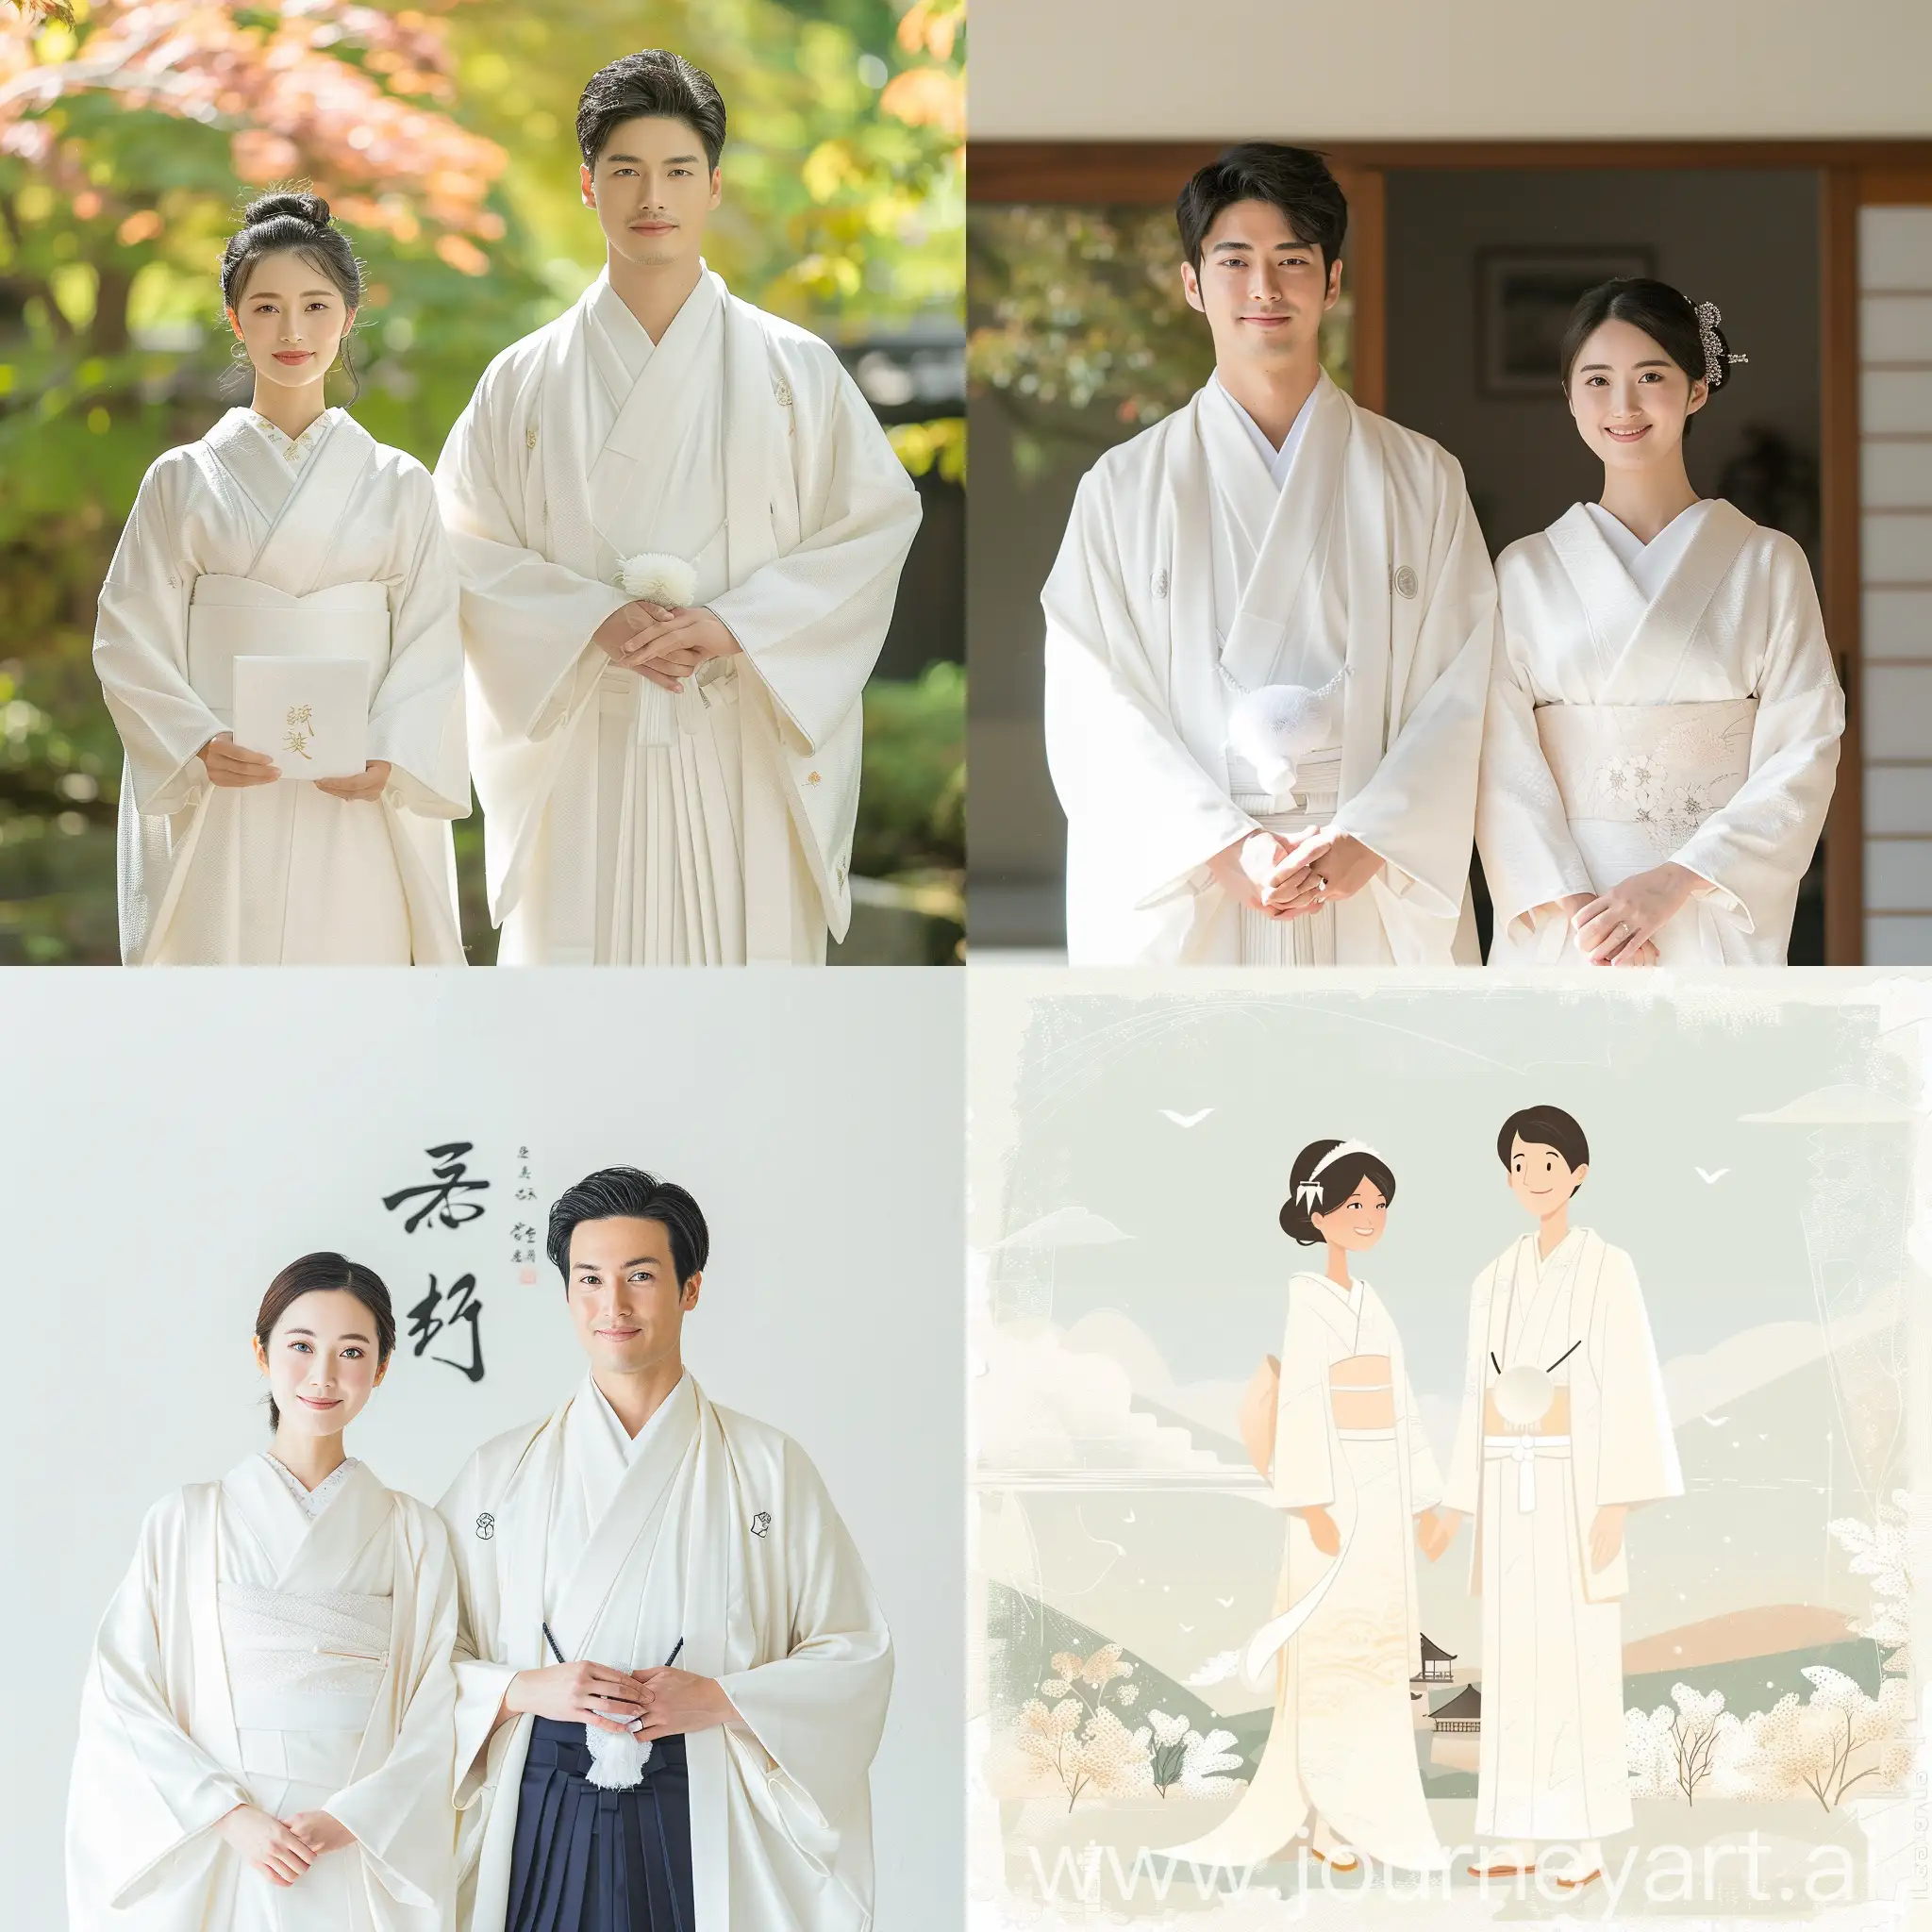 Traditional-Japanese-Wedding-Invitation-Pure-Bride-and-Groom-in-Affectionate-Pose